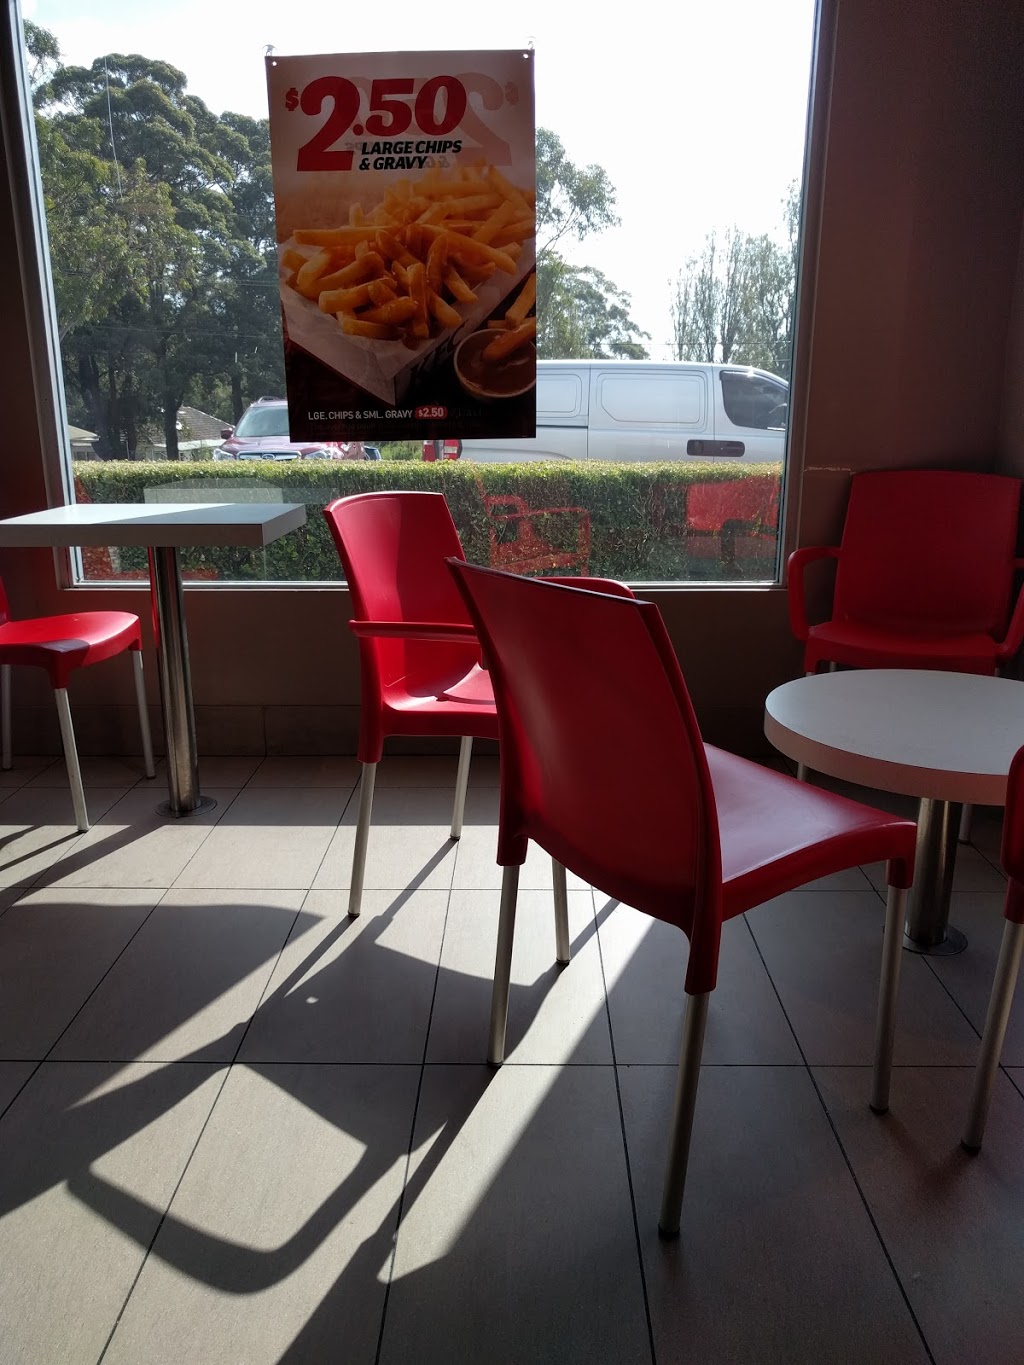 KFC Dural | meal takeaway | 286 New Line Rd, Dural NSW 2158, Australia | 0296512231 OR +61 2 9651 2231